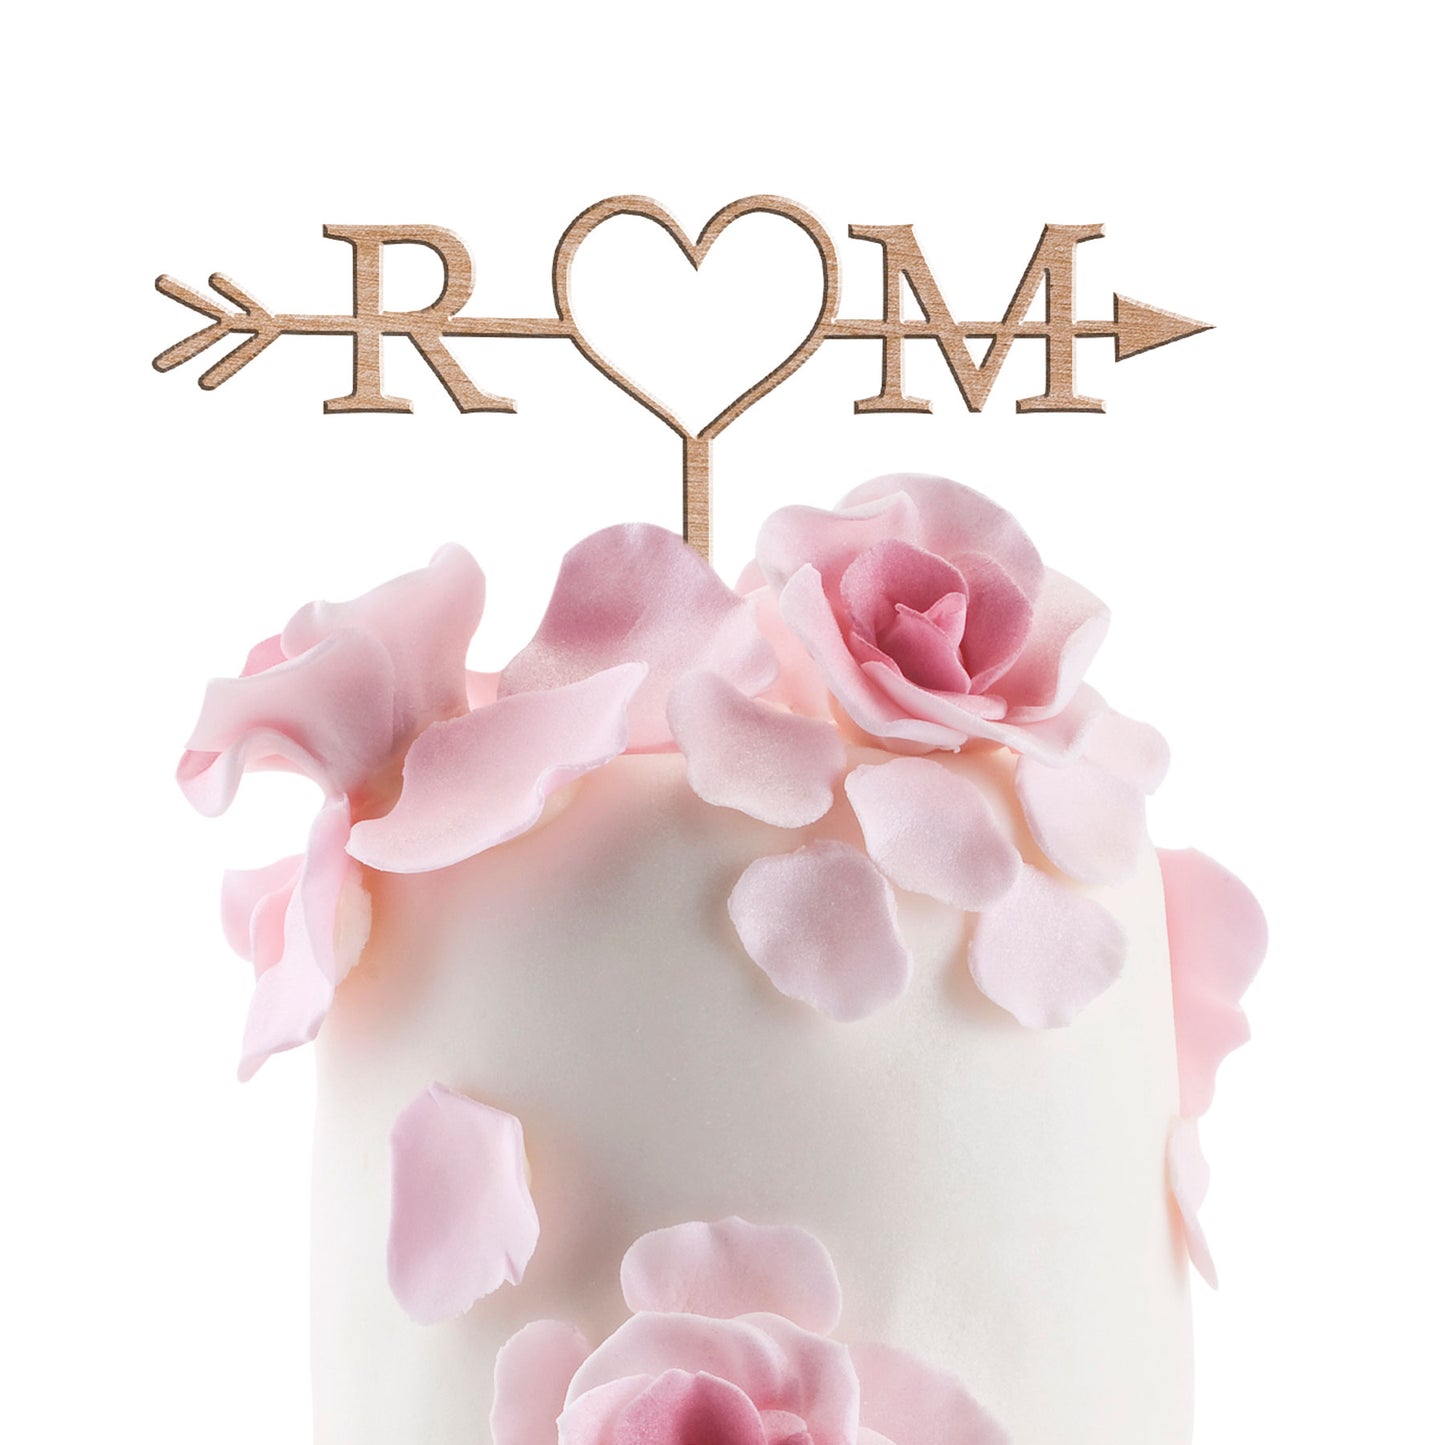 Initials with Love Heart & Arrow Cake Topper